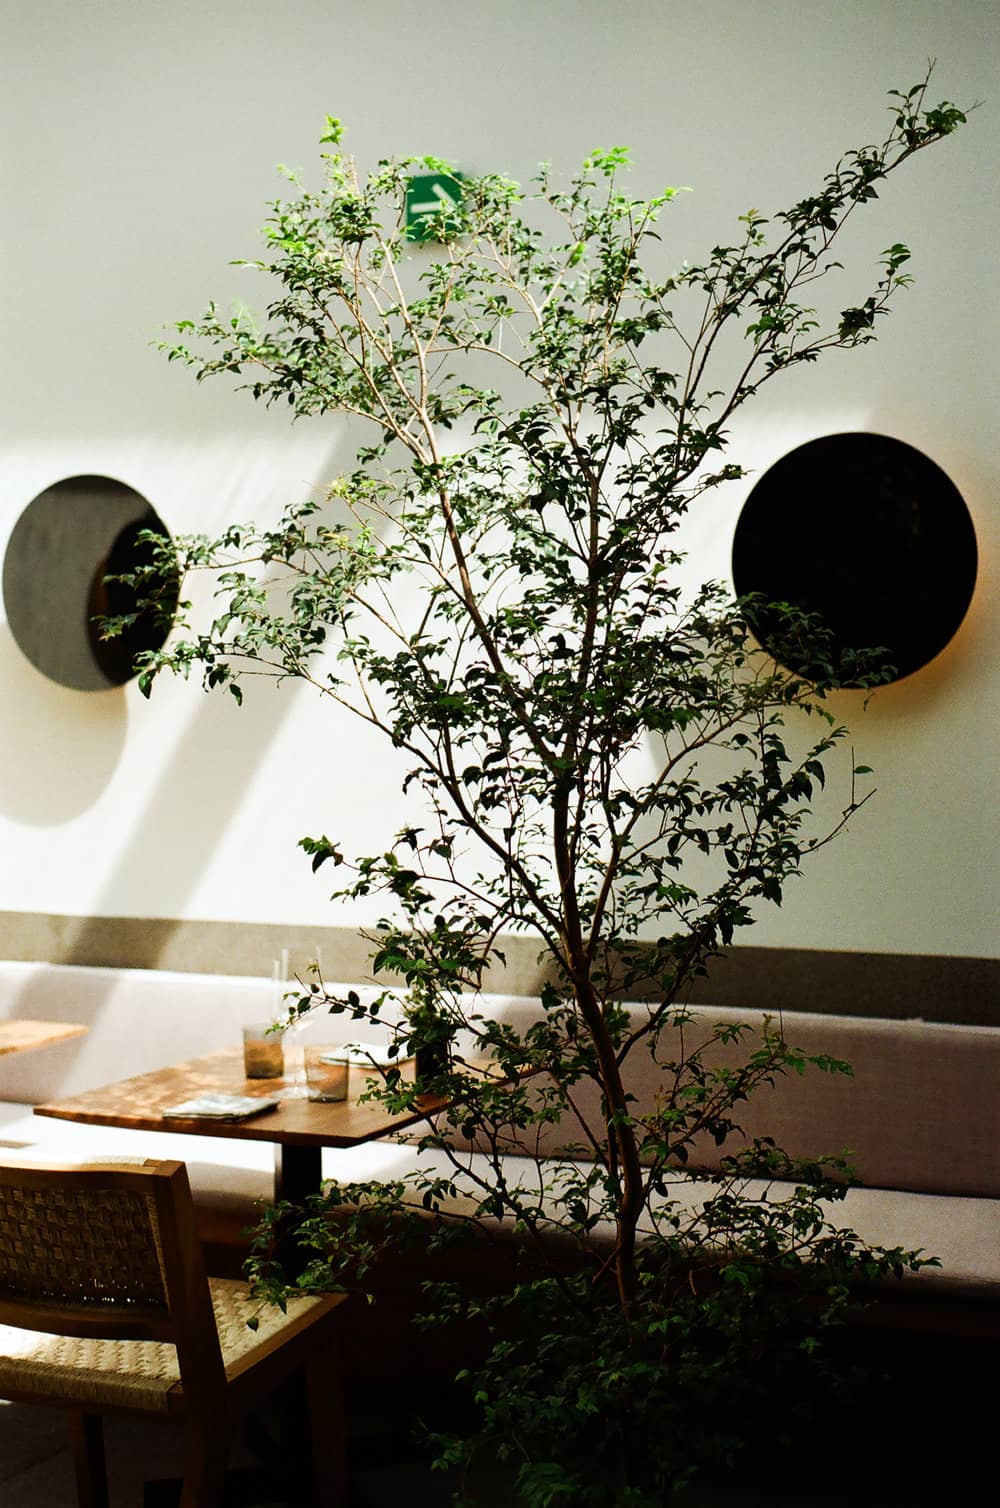 Pujol Restaurant in Mexico City photographed by Pia Riverola - Travel ...